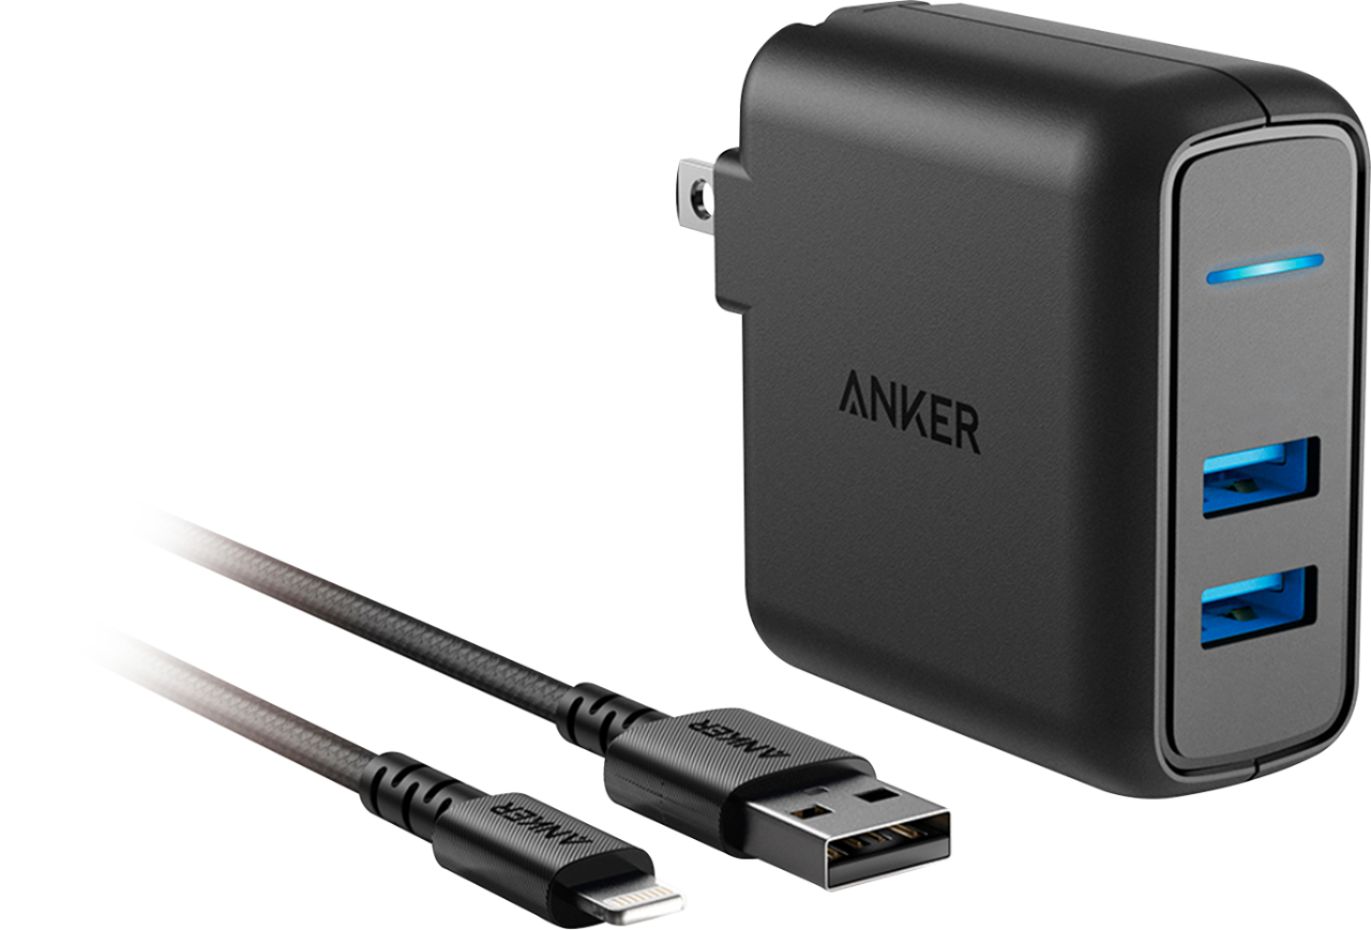 Anker 2-port Powerport 24w Wall Charger (with 3' Powerline Select+